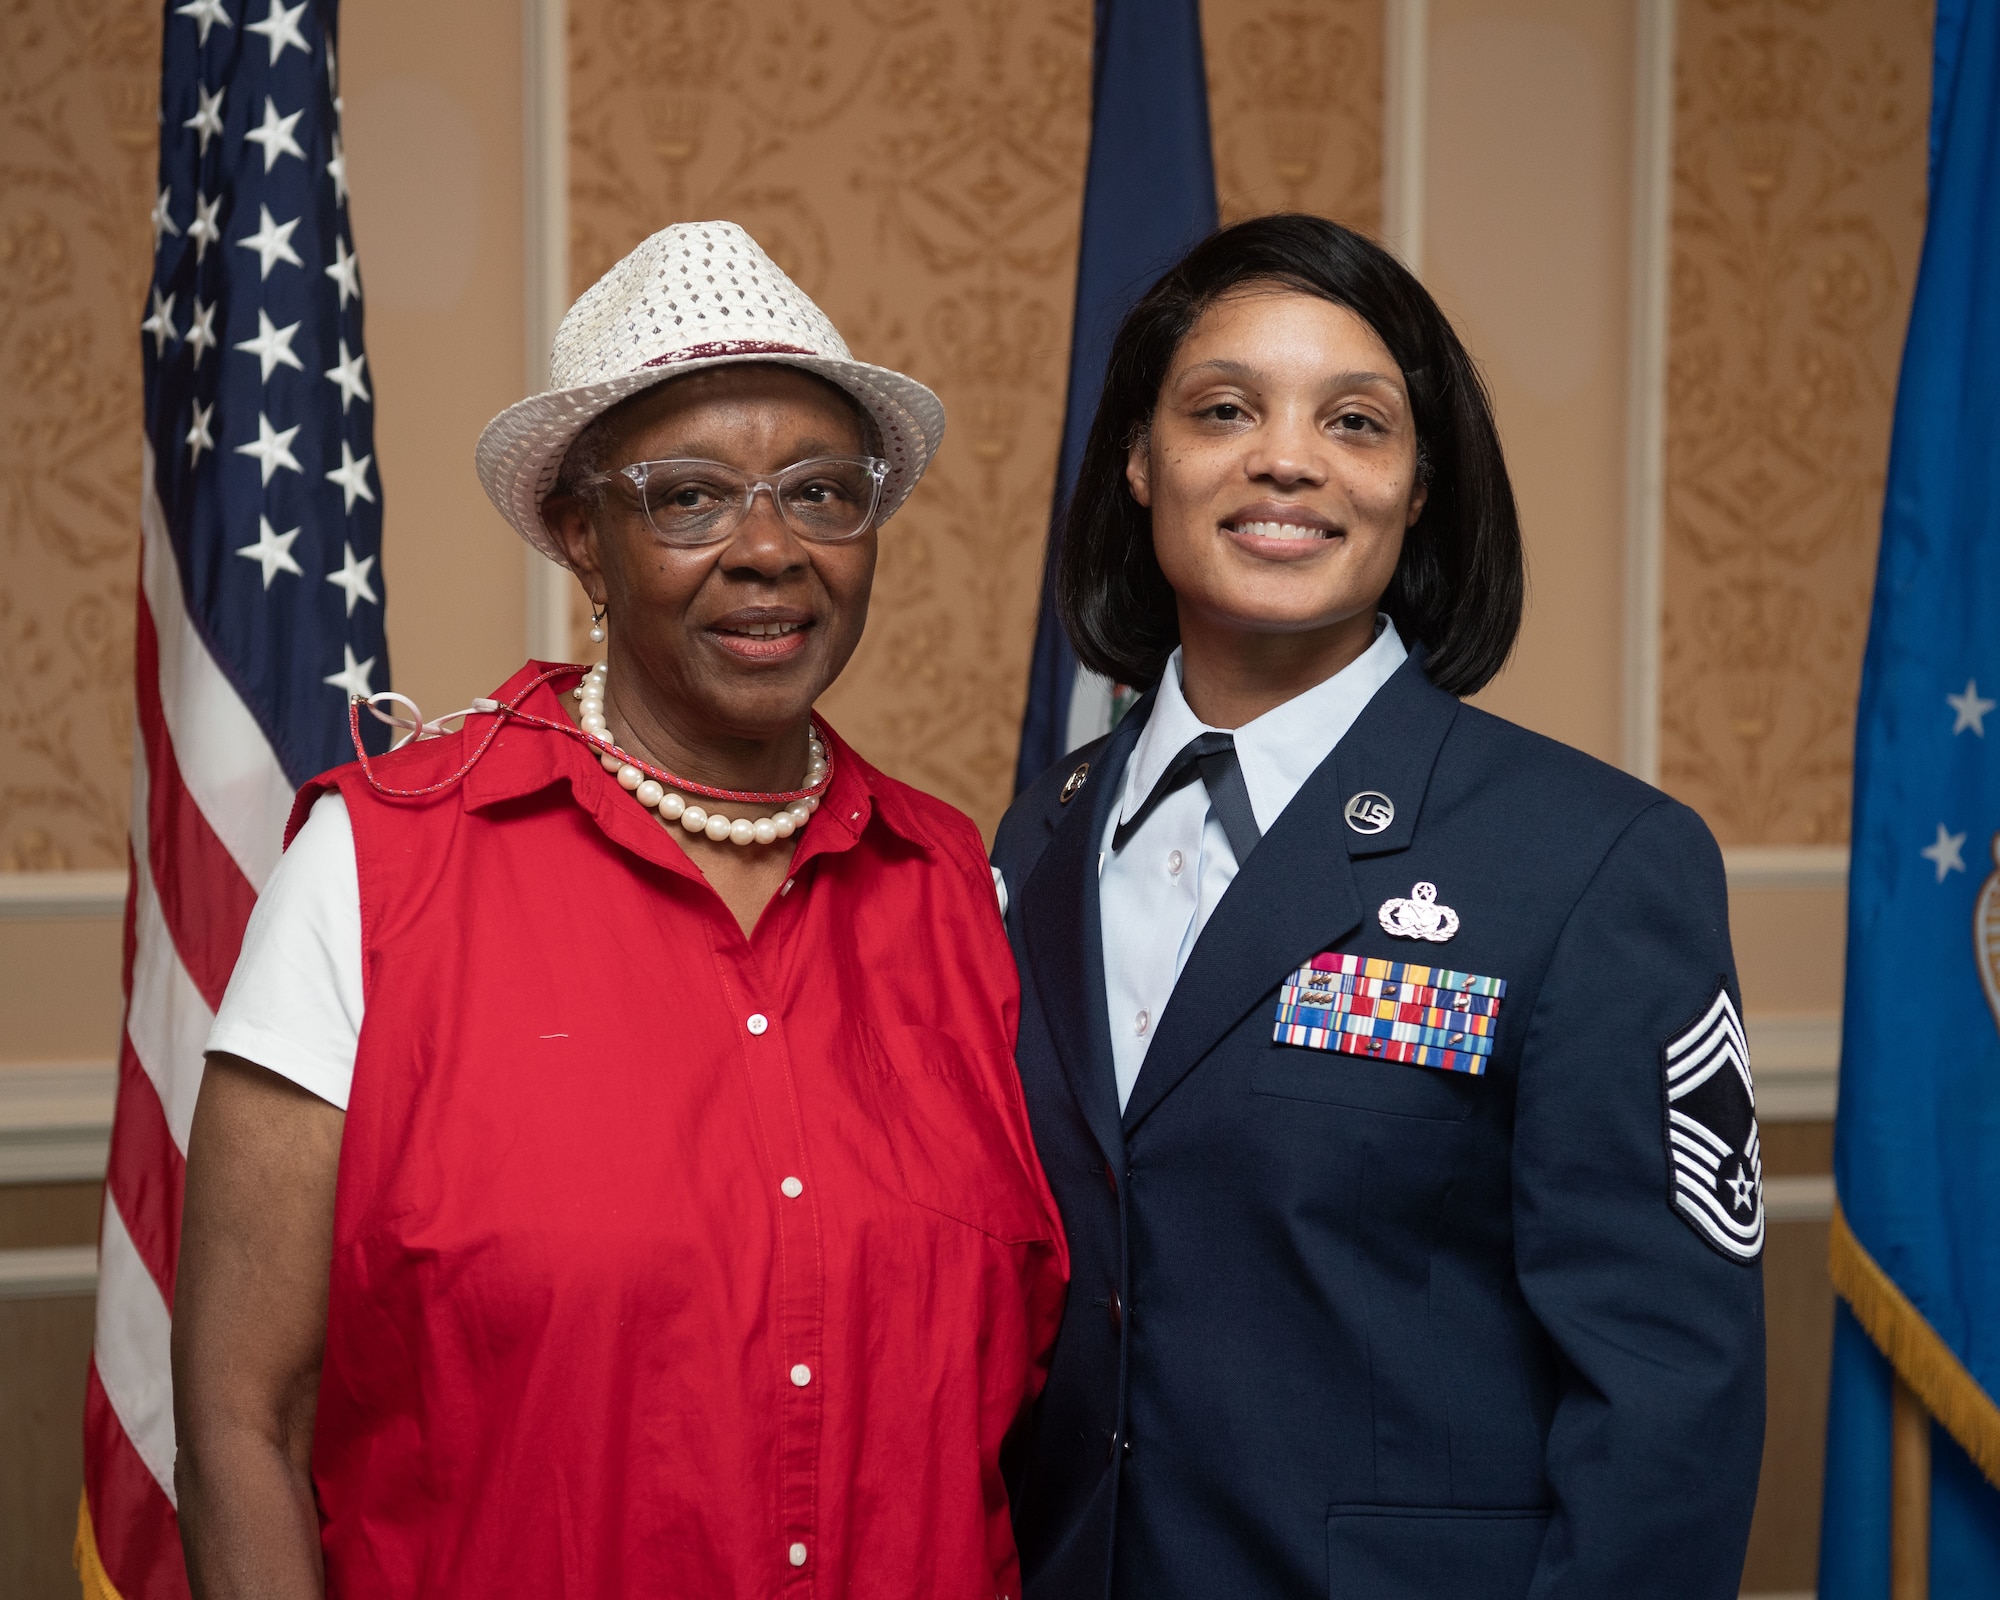 Retired Senior Master Sgt. Dorothy May Tatem and Chief Master Sgt. Lawanda Jackson, 192nd Support Squadron Mobility Flight chief, pose for a photo at Jackson's promotion ceremony on July 10, 20221, at Joint Base Langley-Eustis, Virginia. Tatem was the first Black woman to enlist into the VaANG and Jackson the first Black female to become chief master sergeant. (U.S. Air National Guard photo by Staff Sgt. Bryan Myhr)